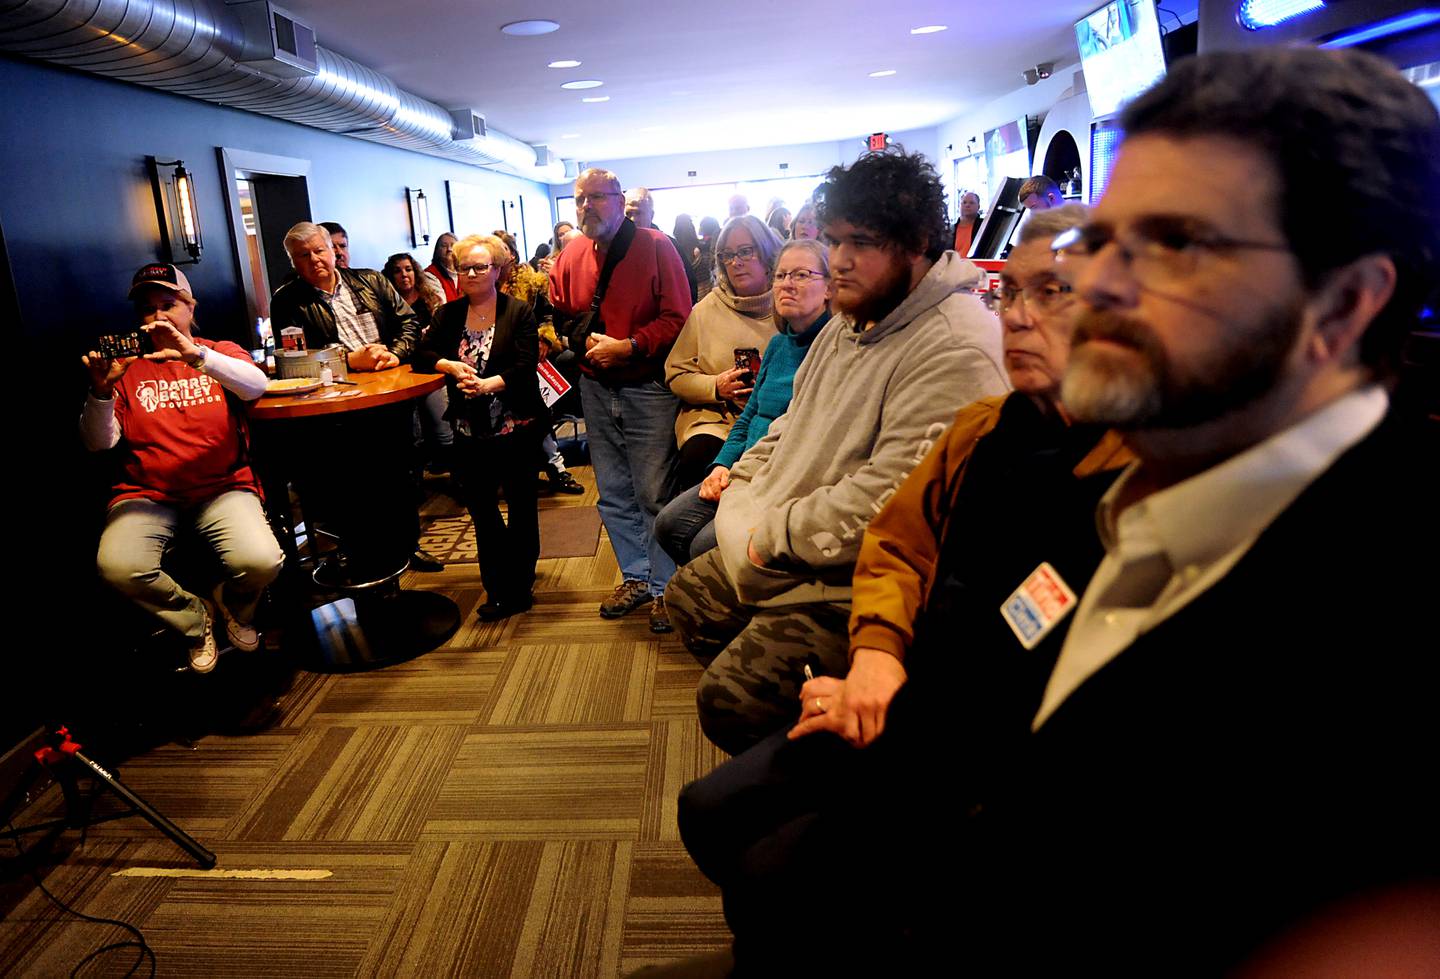 People listen to Darren Bailey, a Republican candidate for Illinois governor, speak Thursday, March 3, 2022, during a stop at the Little Chef Restaurant in McHenry. Bailey, who is one of several Republicans expected to run for a governor, spoke to a room full of people during the first of four scheduled campaign stops Thursday.